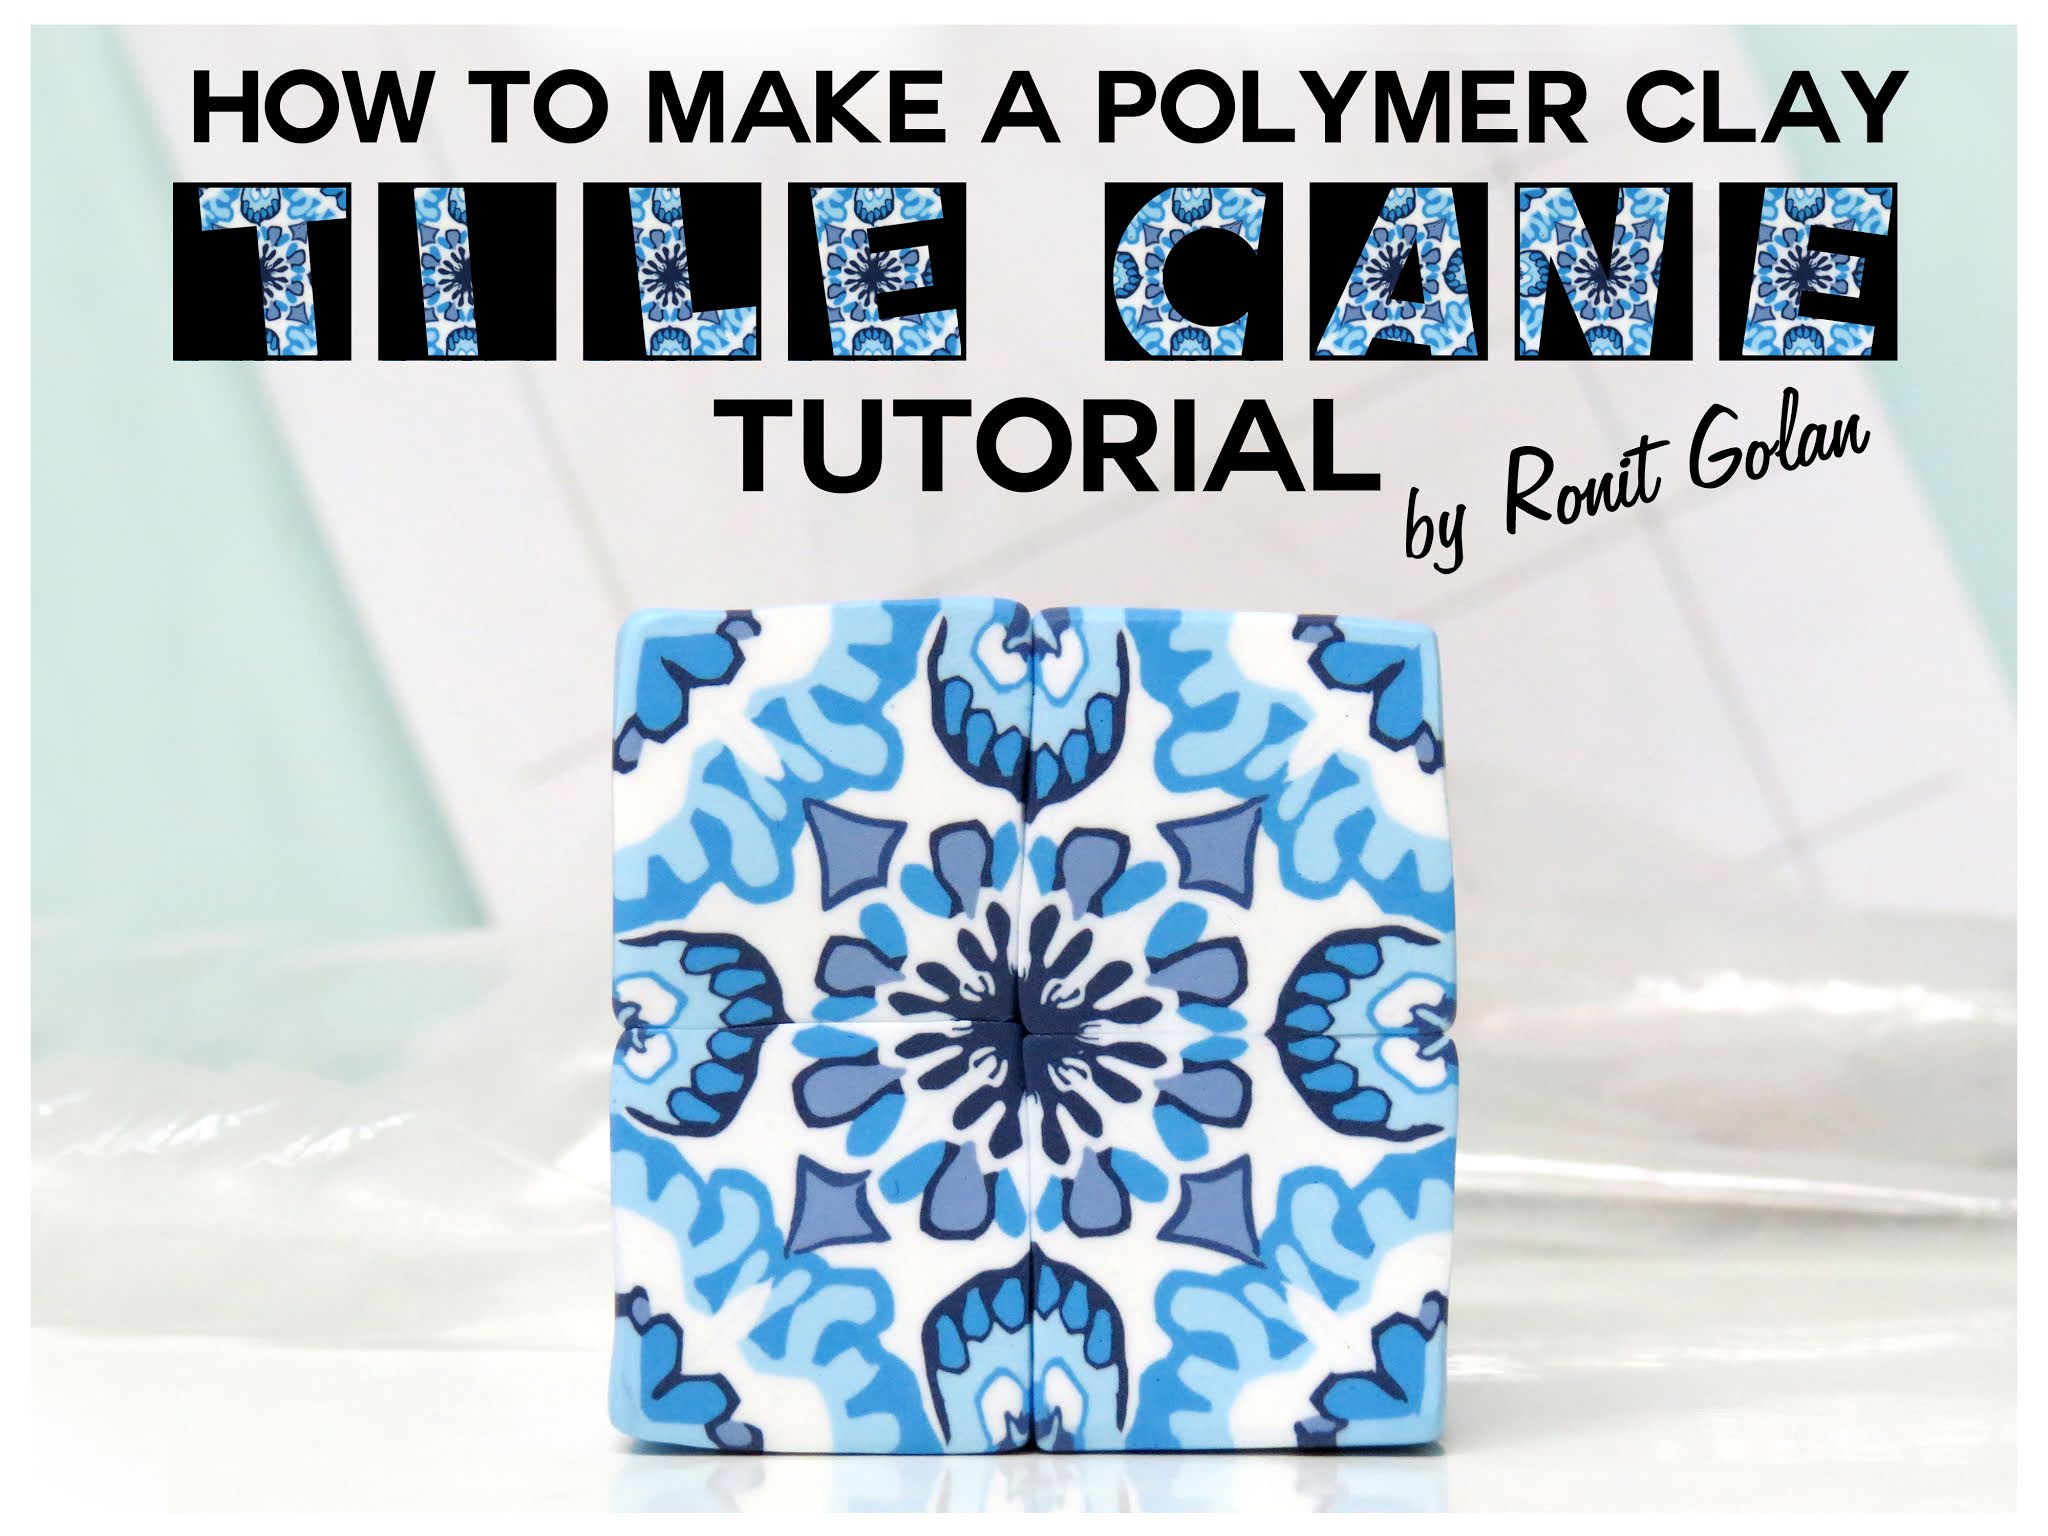 Mosaic Cane Polymer Clay Tutorial - How to make mosaic cane and turn it  into a slab 